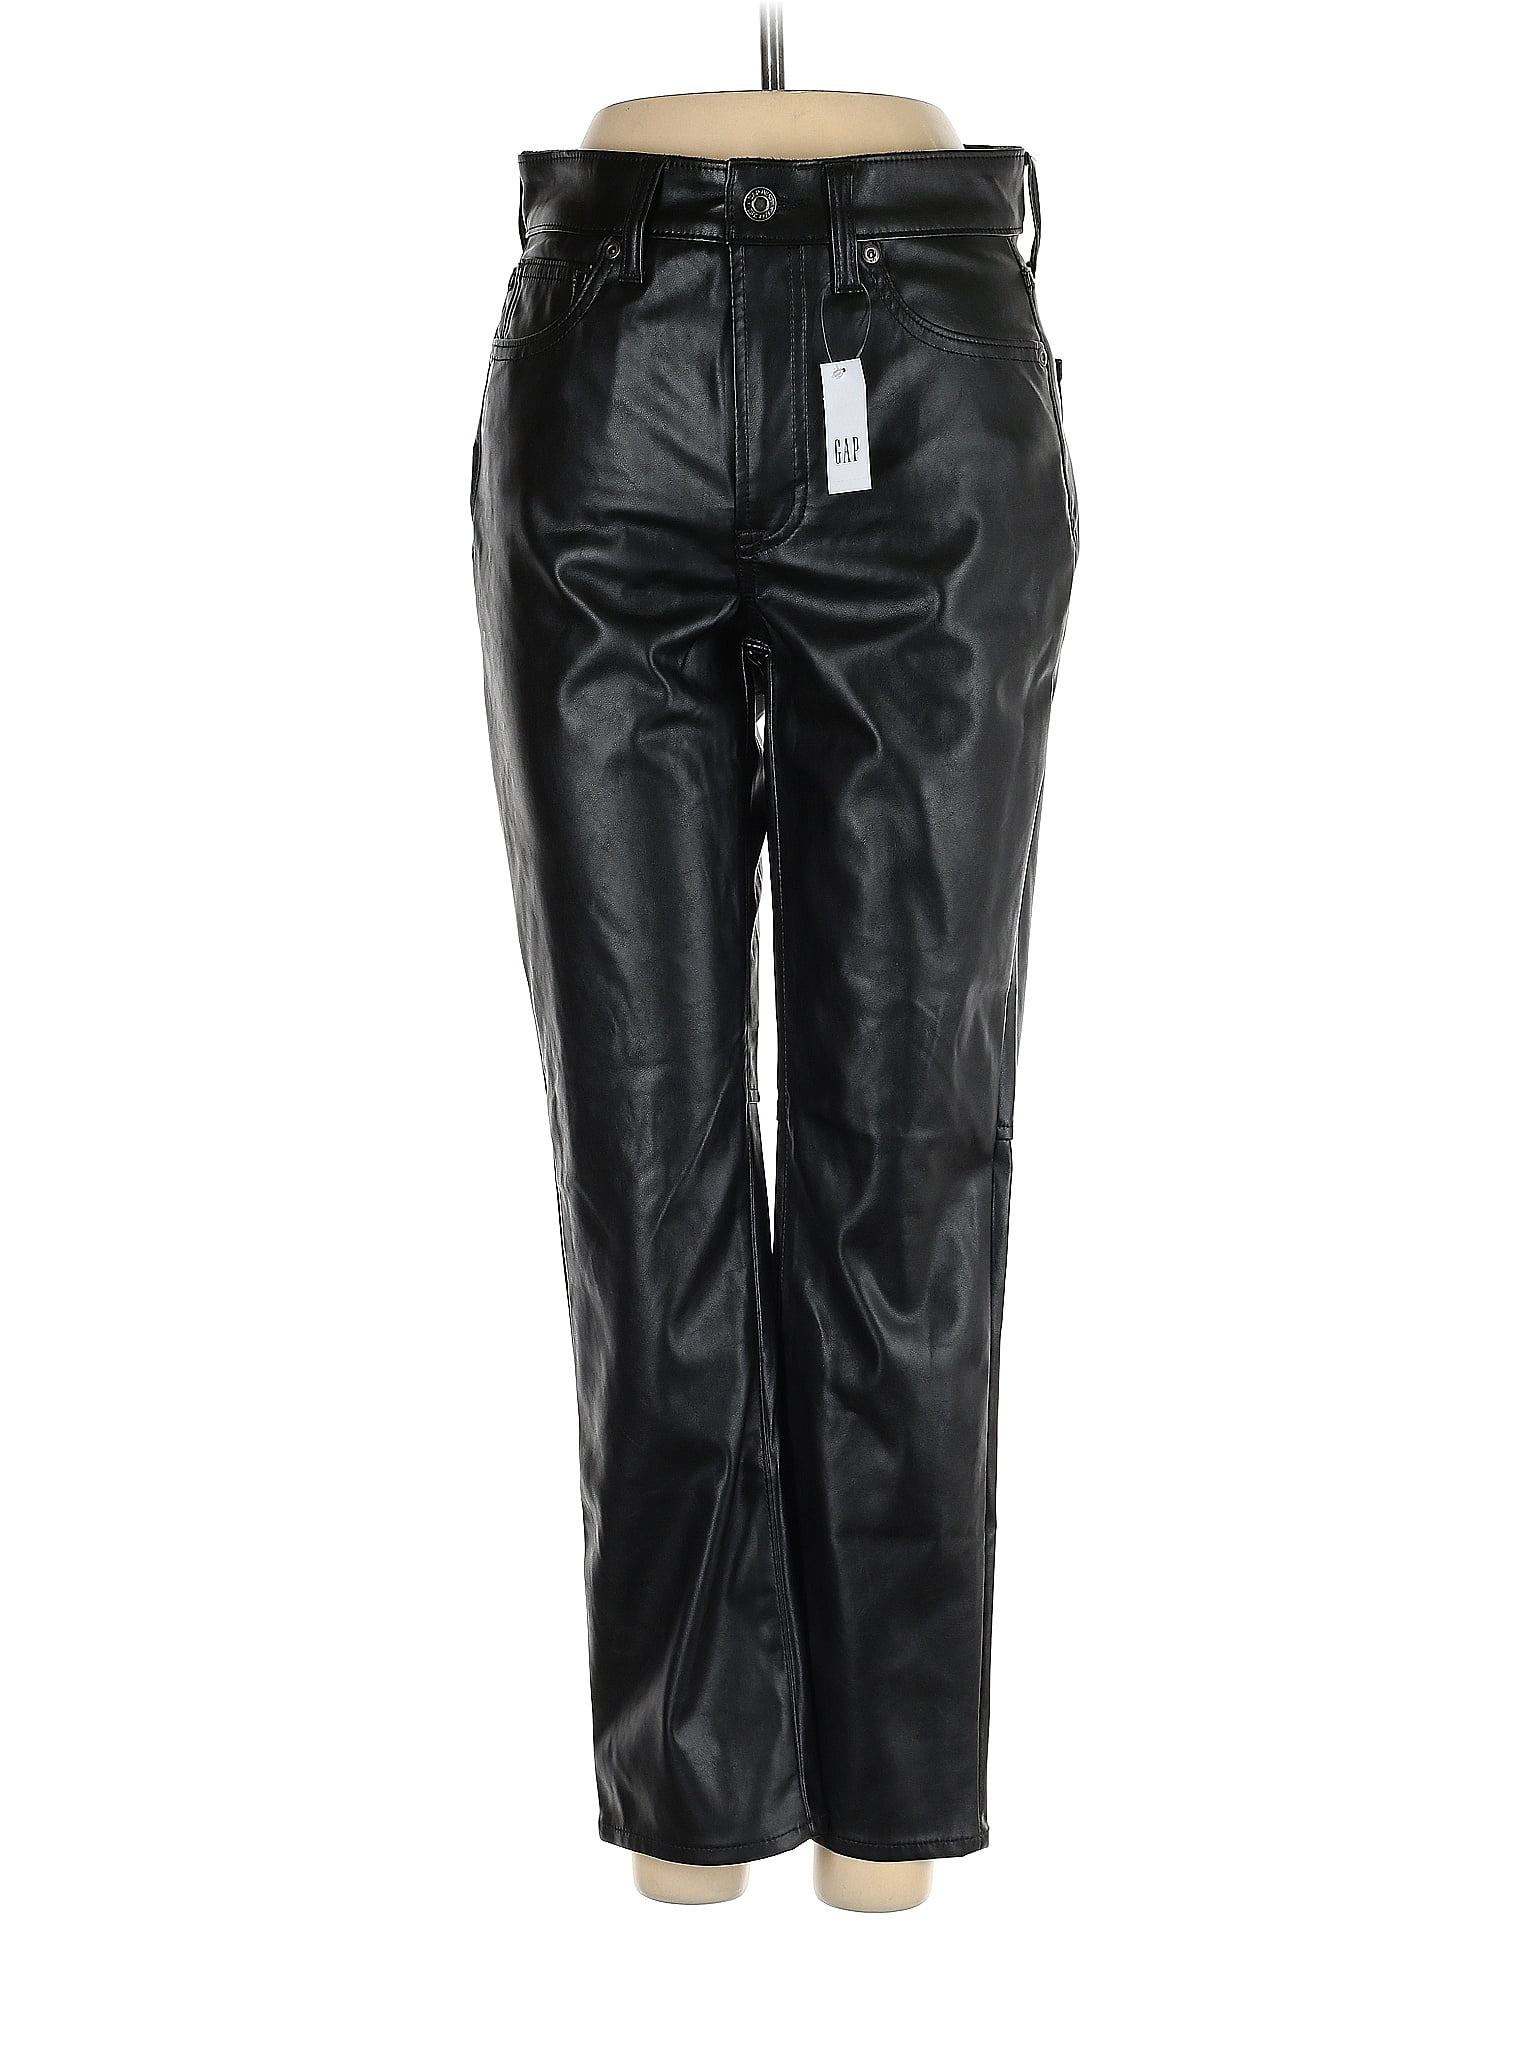 Gap 100% Polyester Solid Black Faux Leather Pants Size 2 (Petite) - 62% ...